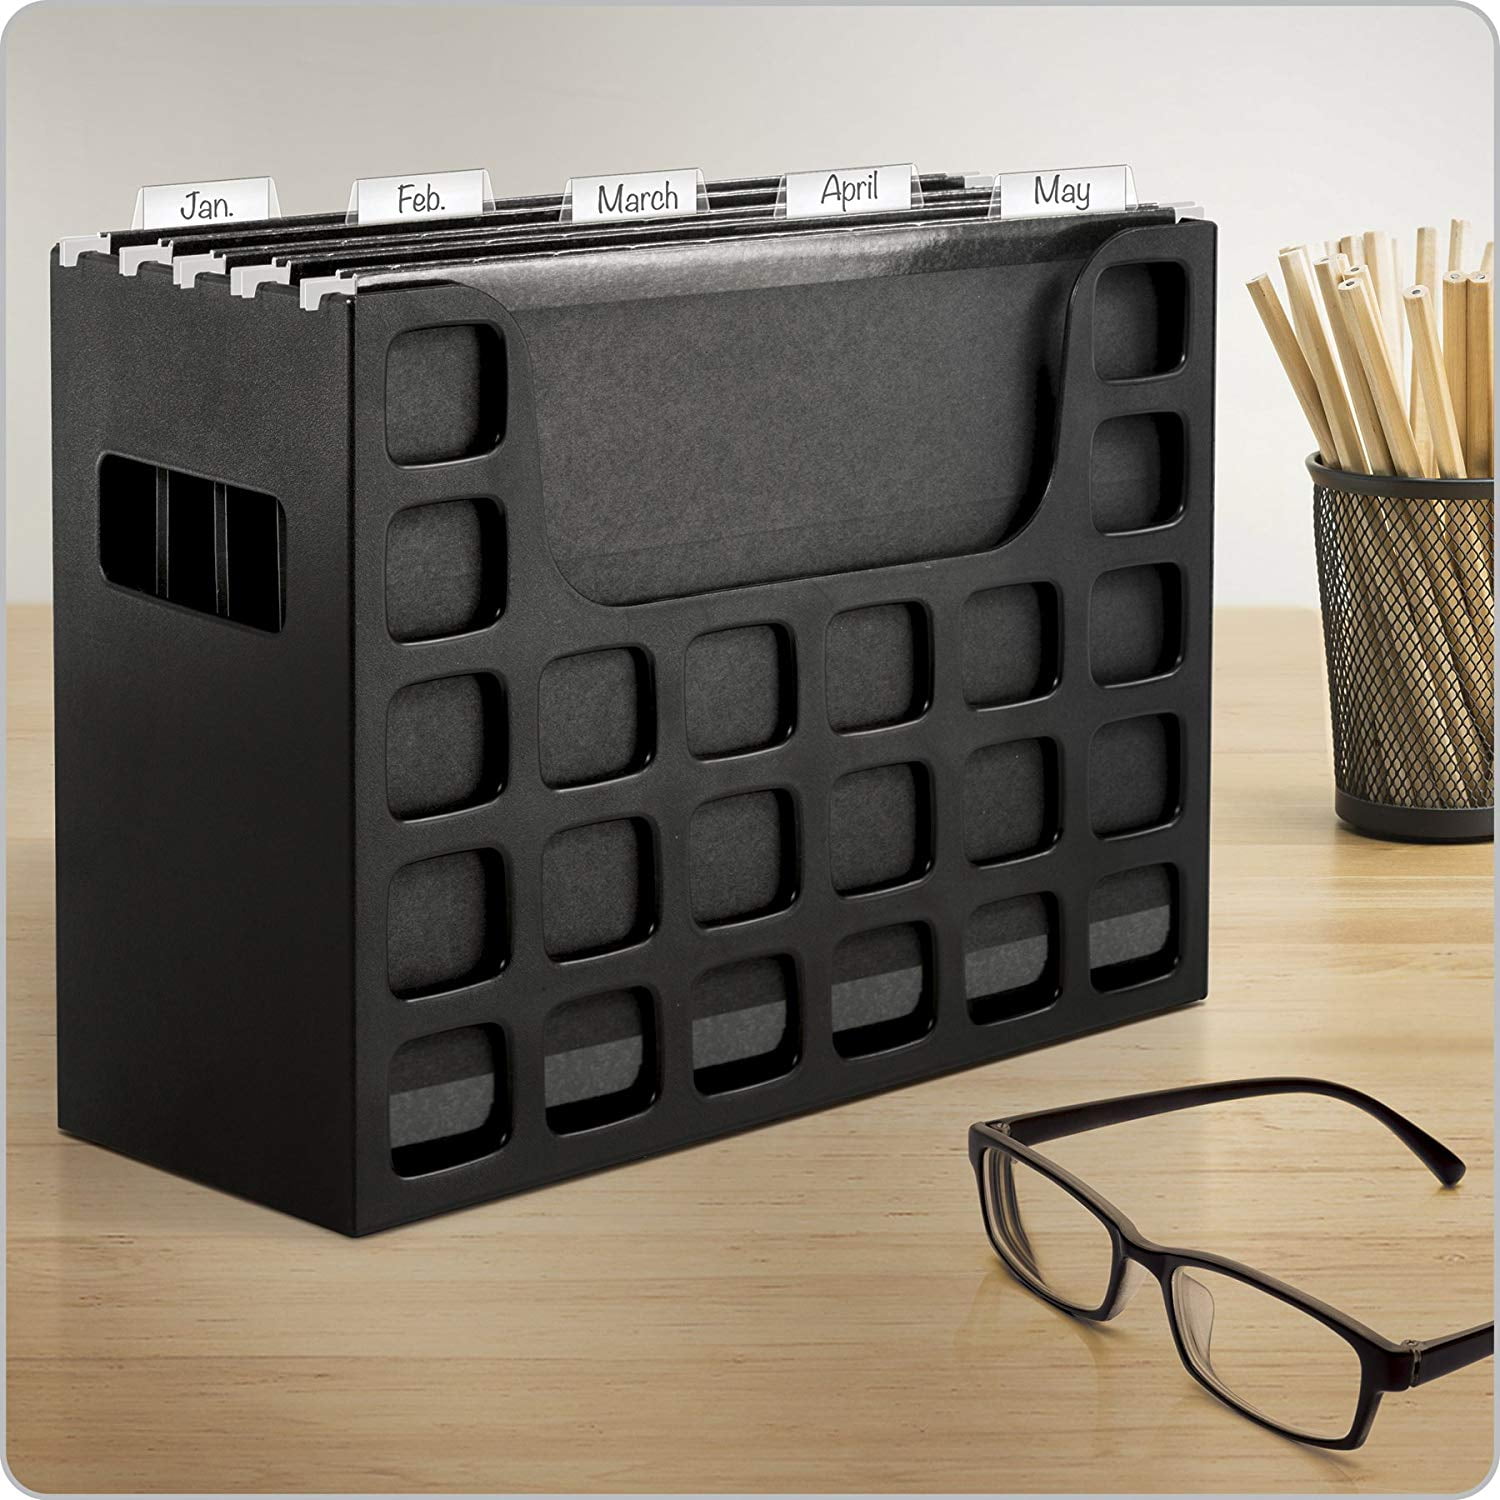 Portable Desktop File 9-1/2 x 12-3/16 x 6 Inches Hanging File Folders 1 Pack Black Letter Size Tabs & Inserts Side Handles 